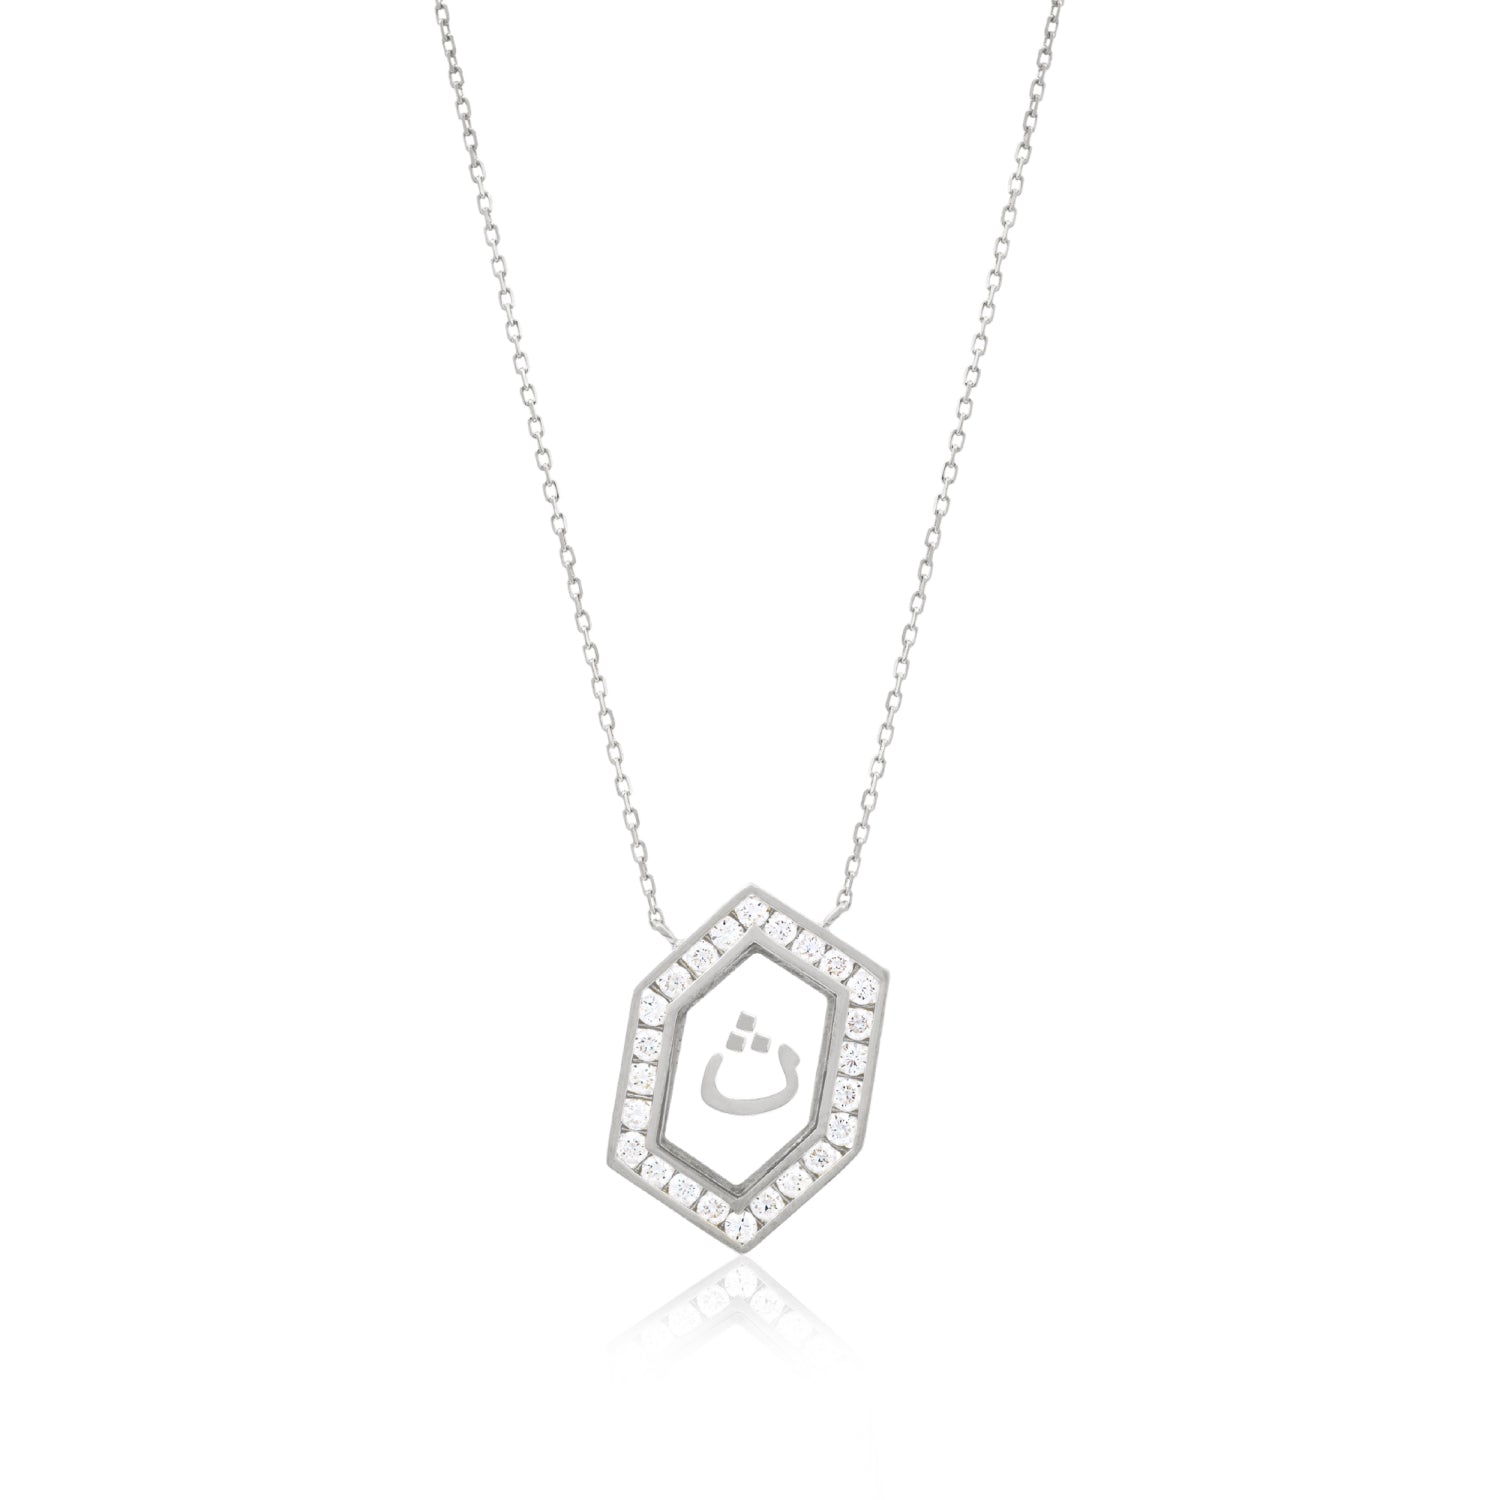 Qamoos 1.0 Letter ث Diamond Necklace in White Gold